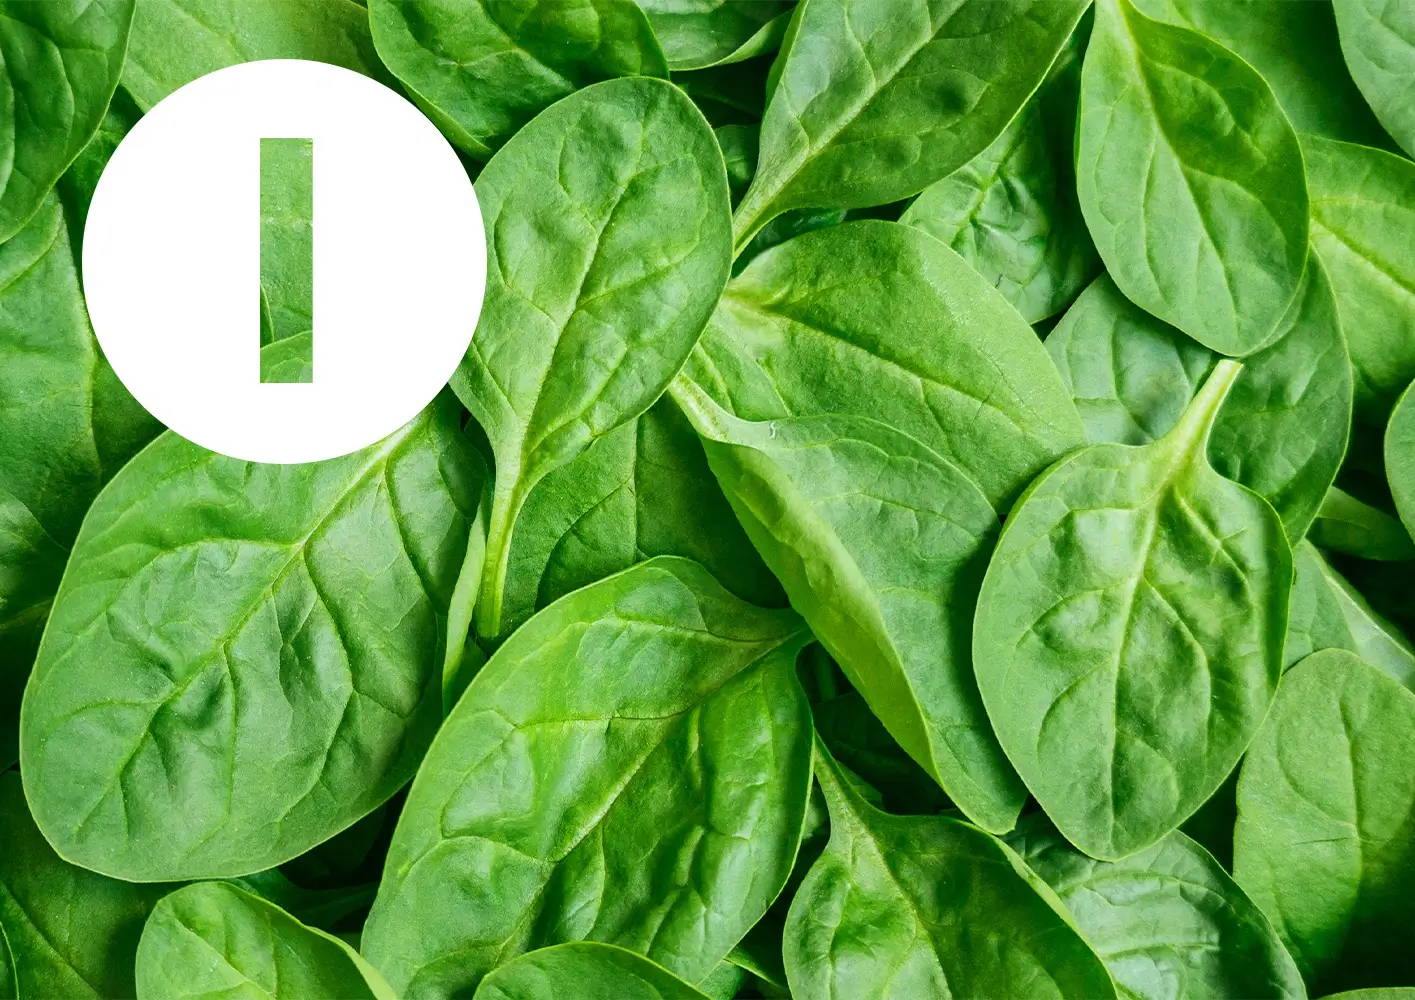 Letter I / spinach leaves.